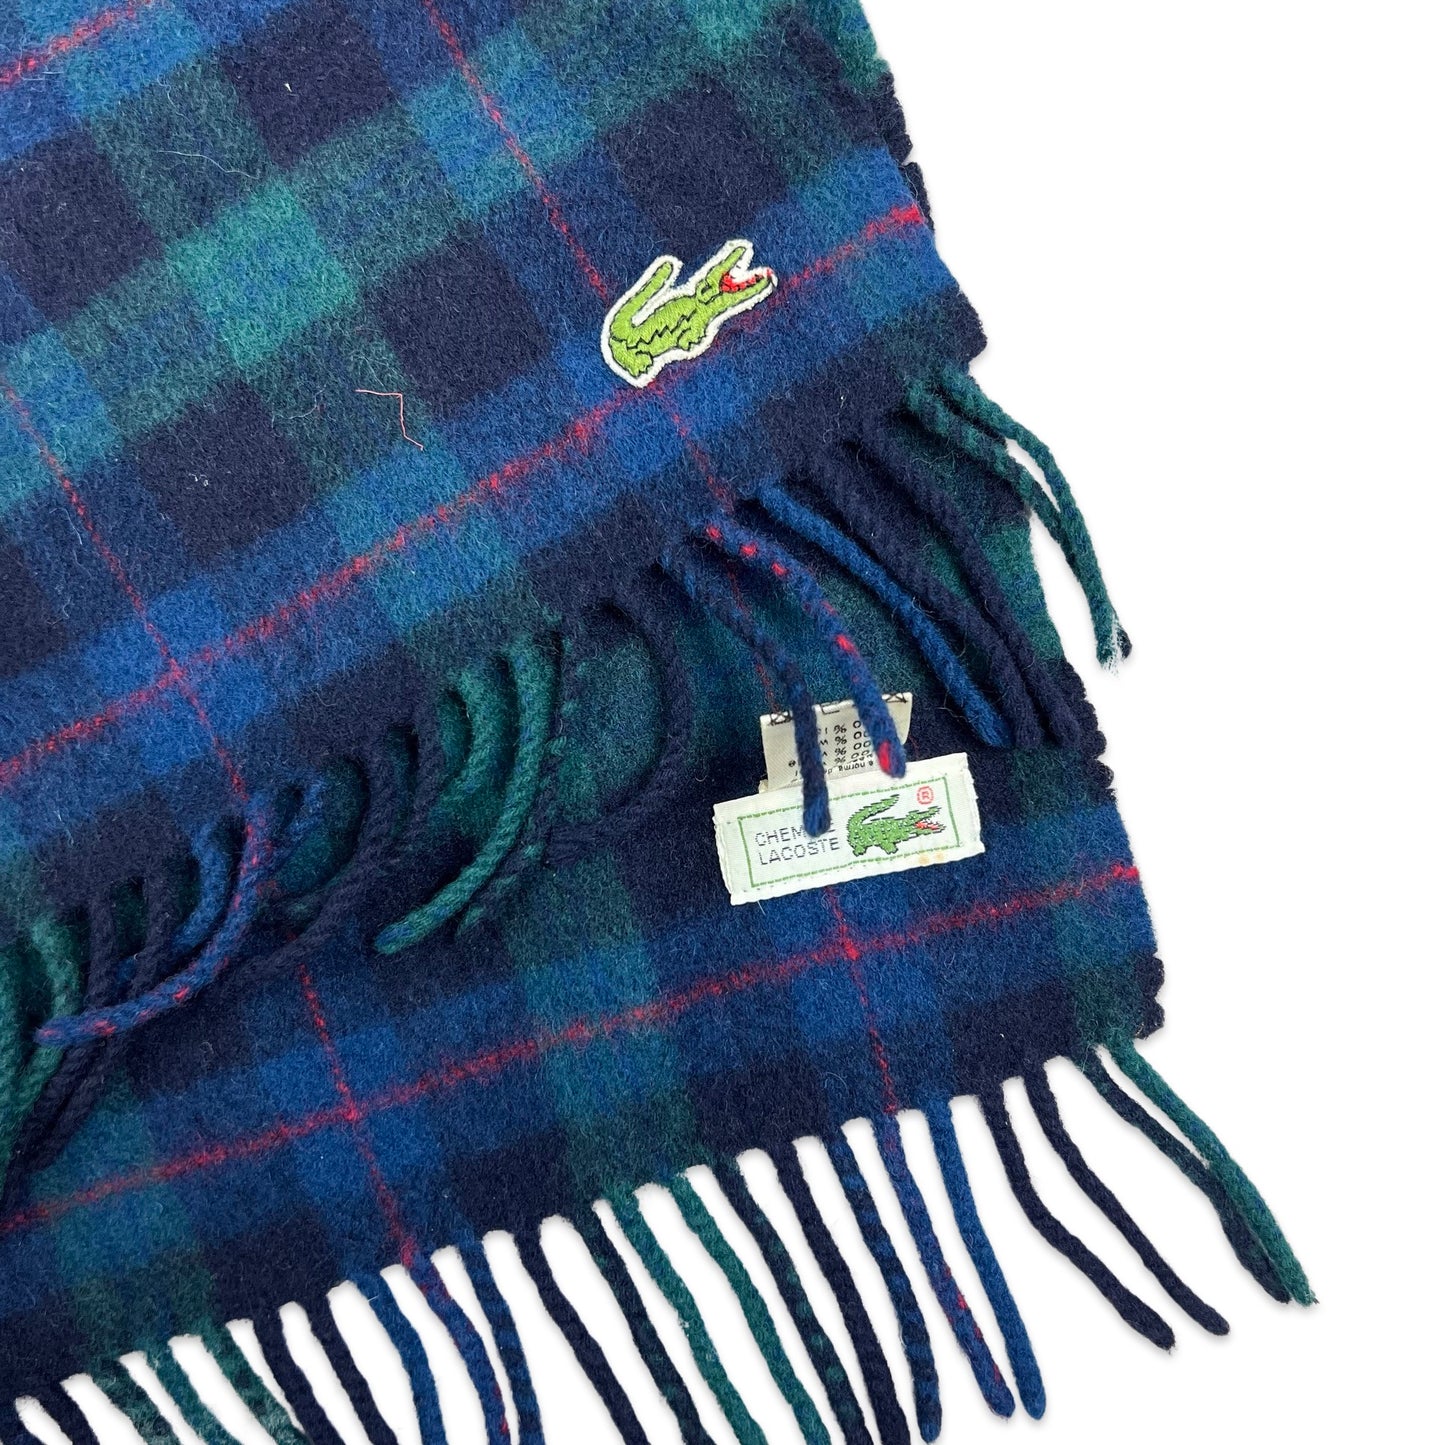 Vintage Lacoste Plaid Wool Scarf Blue Green Red